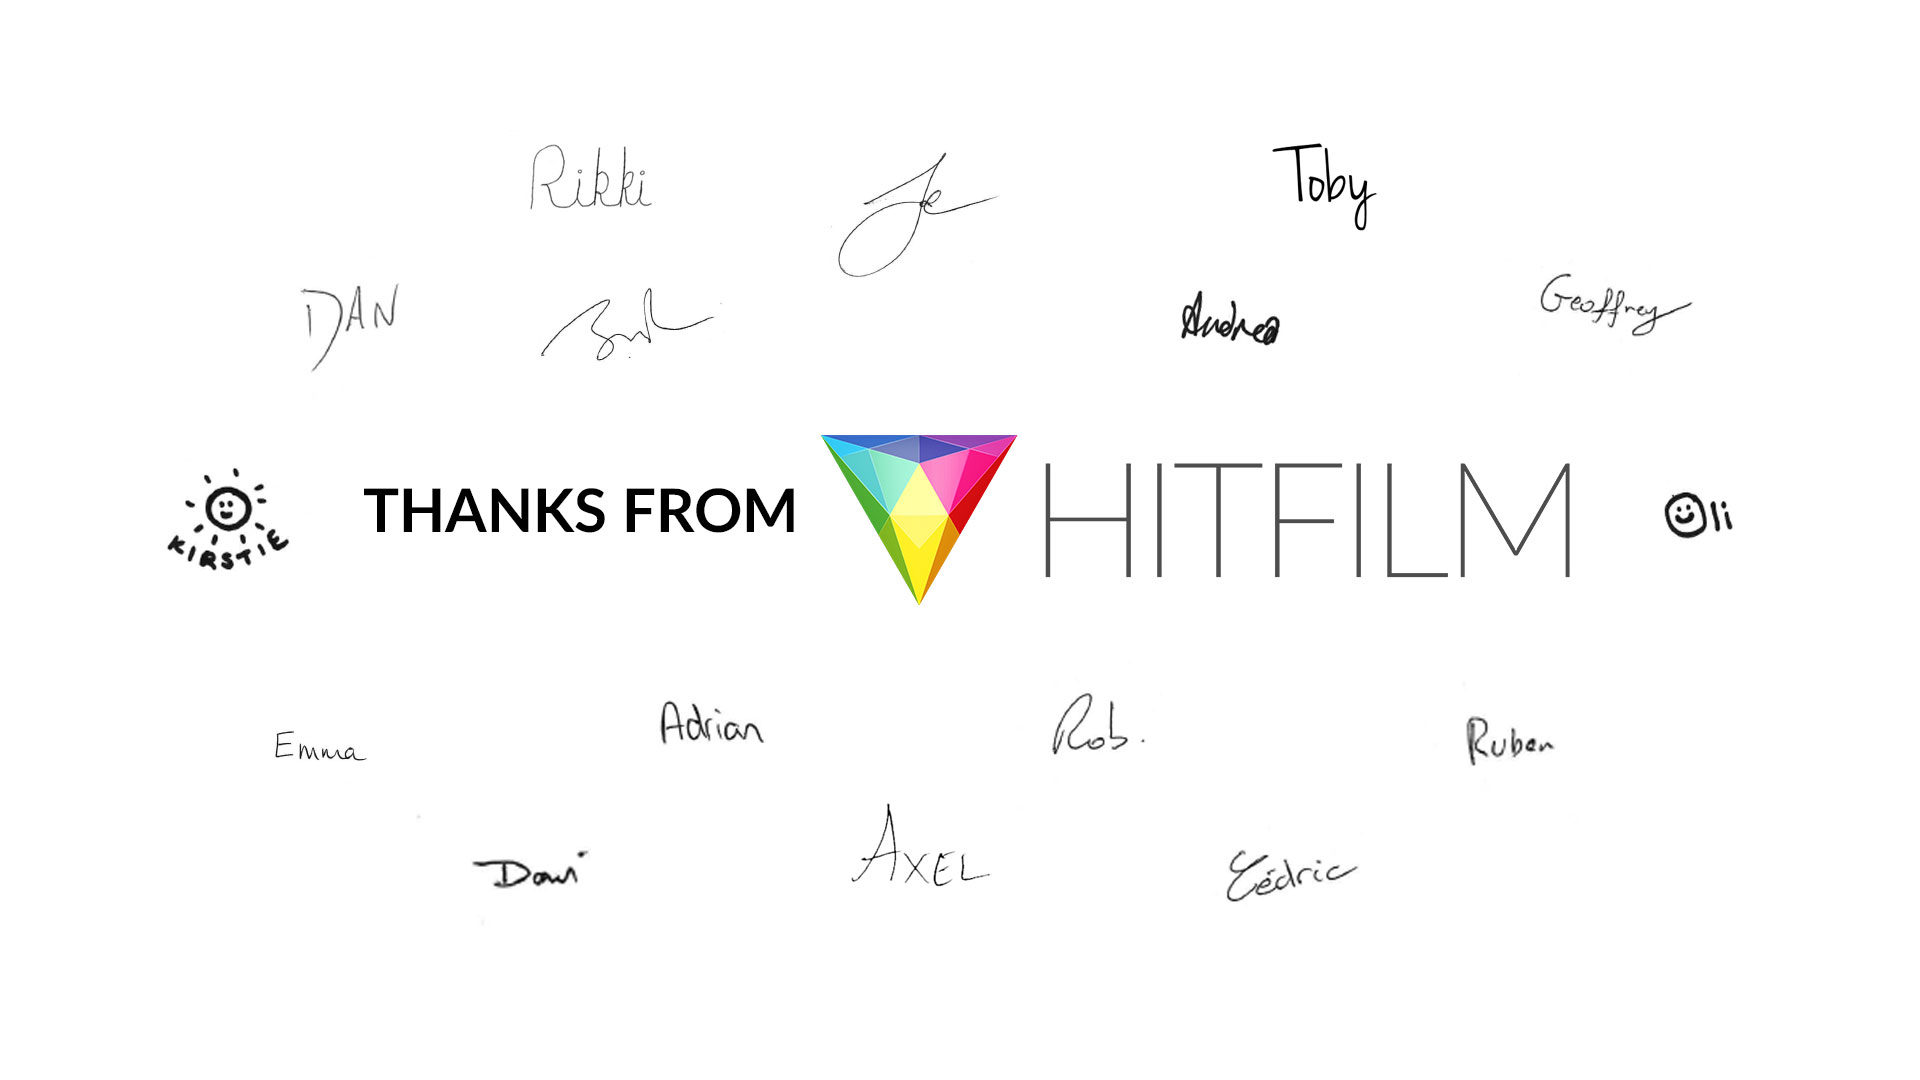 Thanks from the HitFilm team